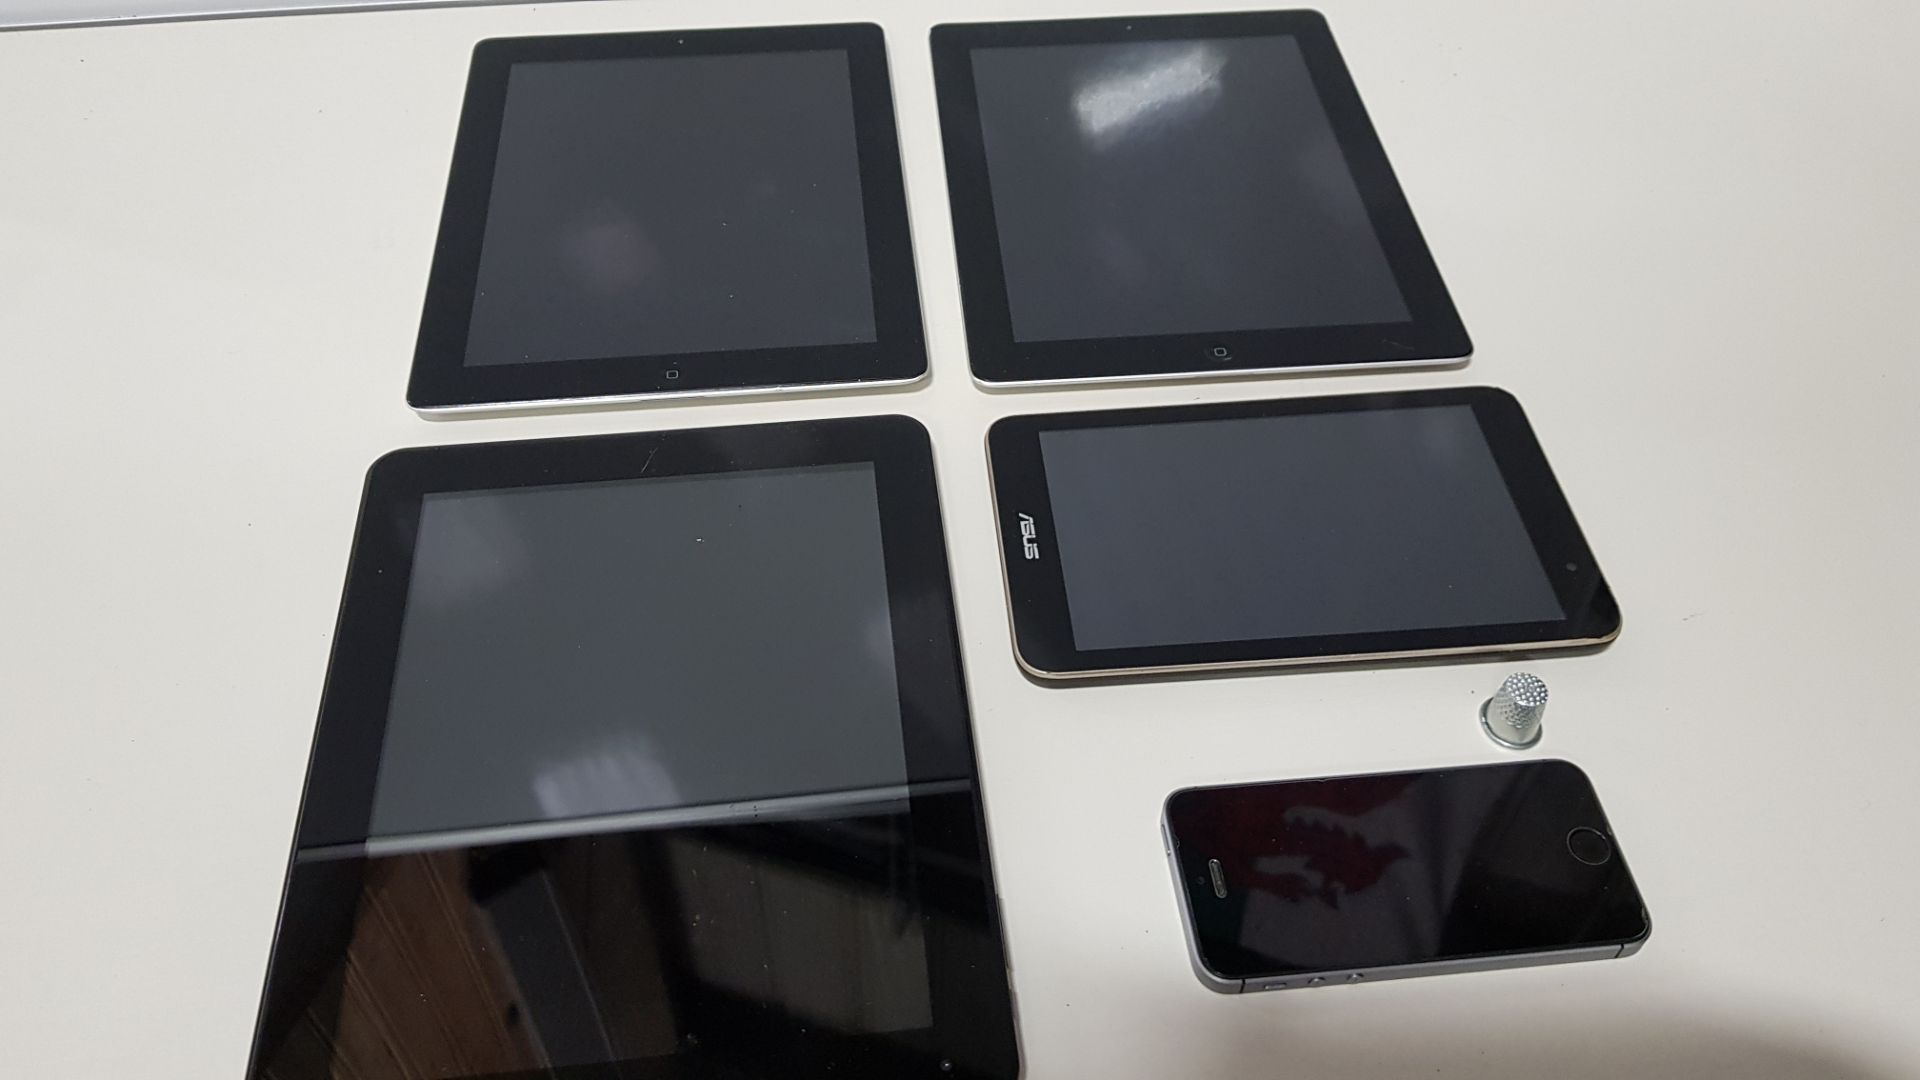 5 PIECE ELECTRONICS LOT CONTAINING 2 X 16GB IPADS, YARVIK TABLET, ASUS TABLET AND AN IPHONE ALL